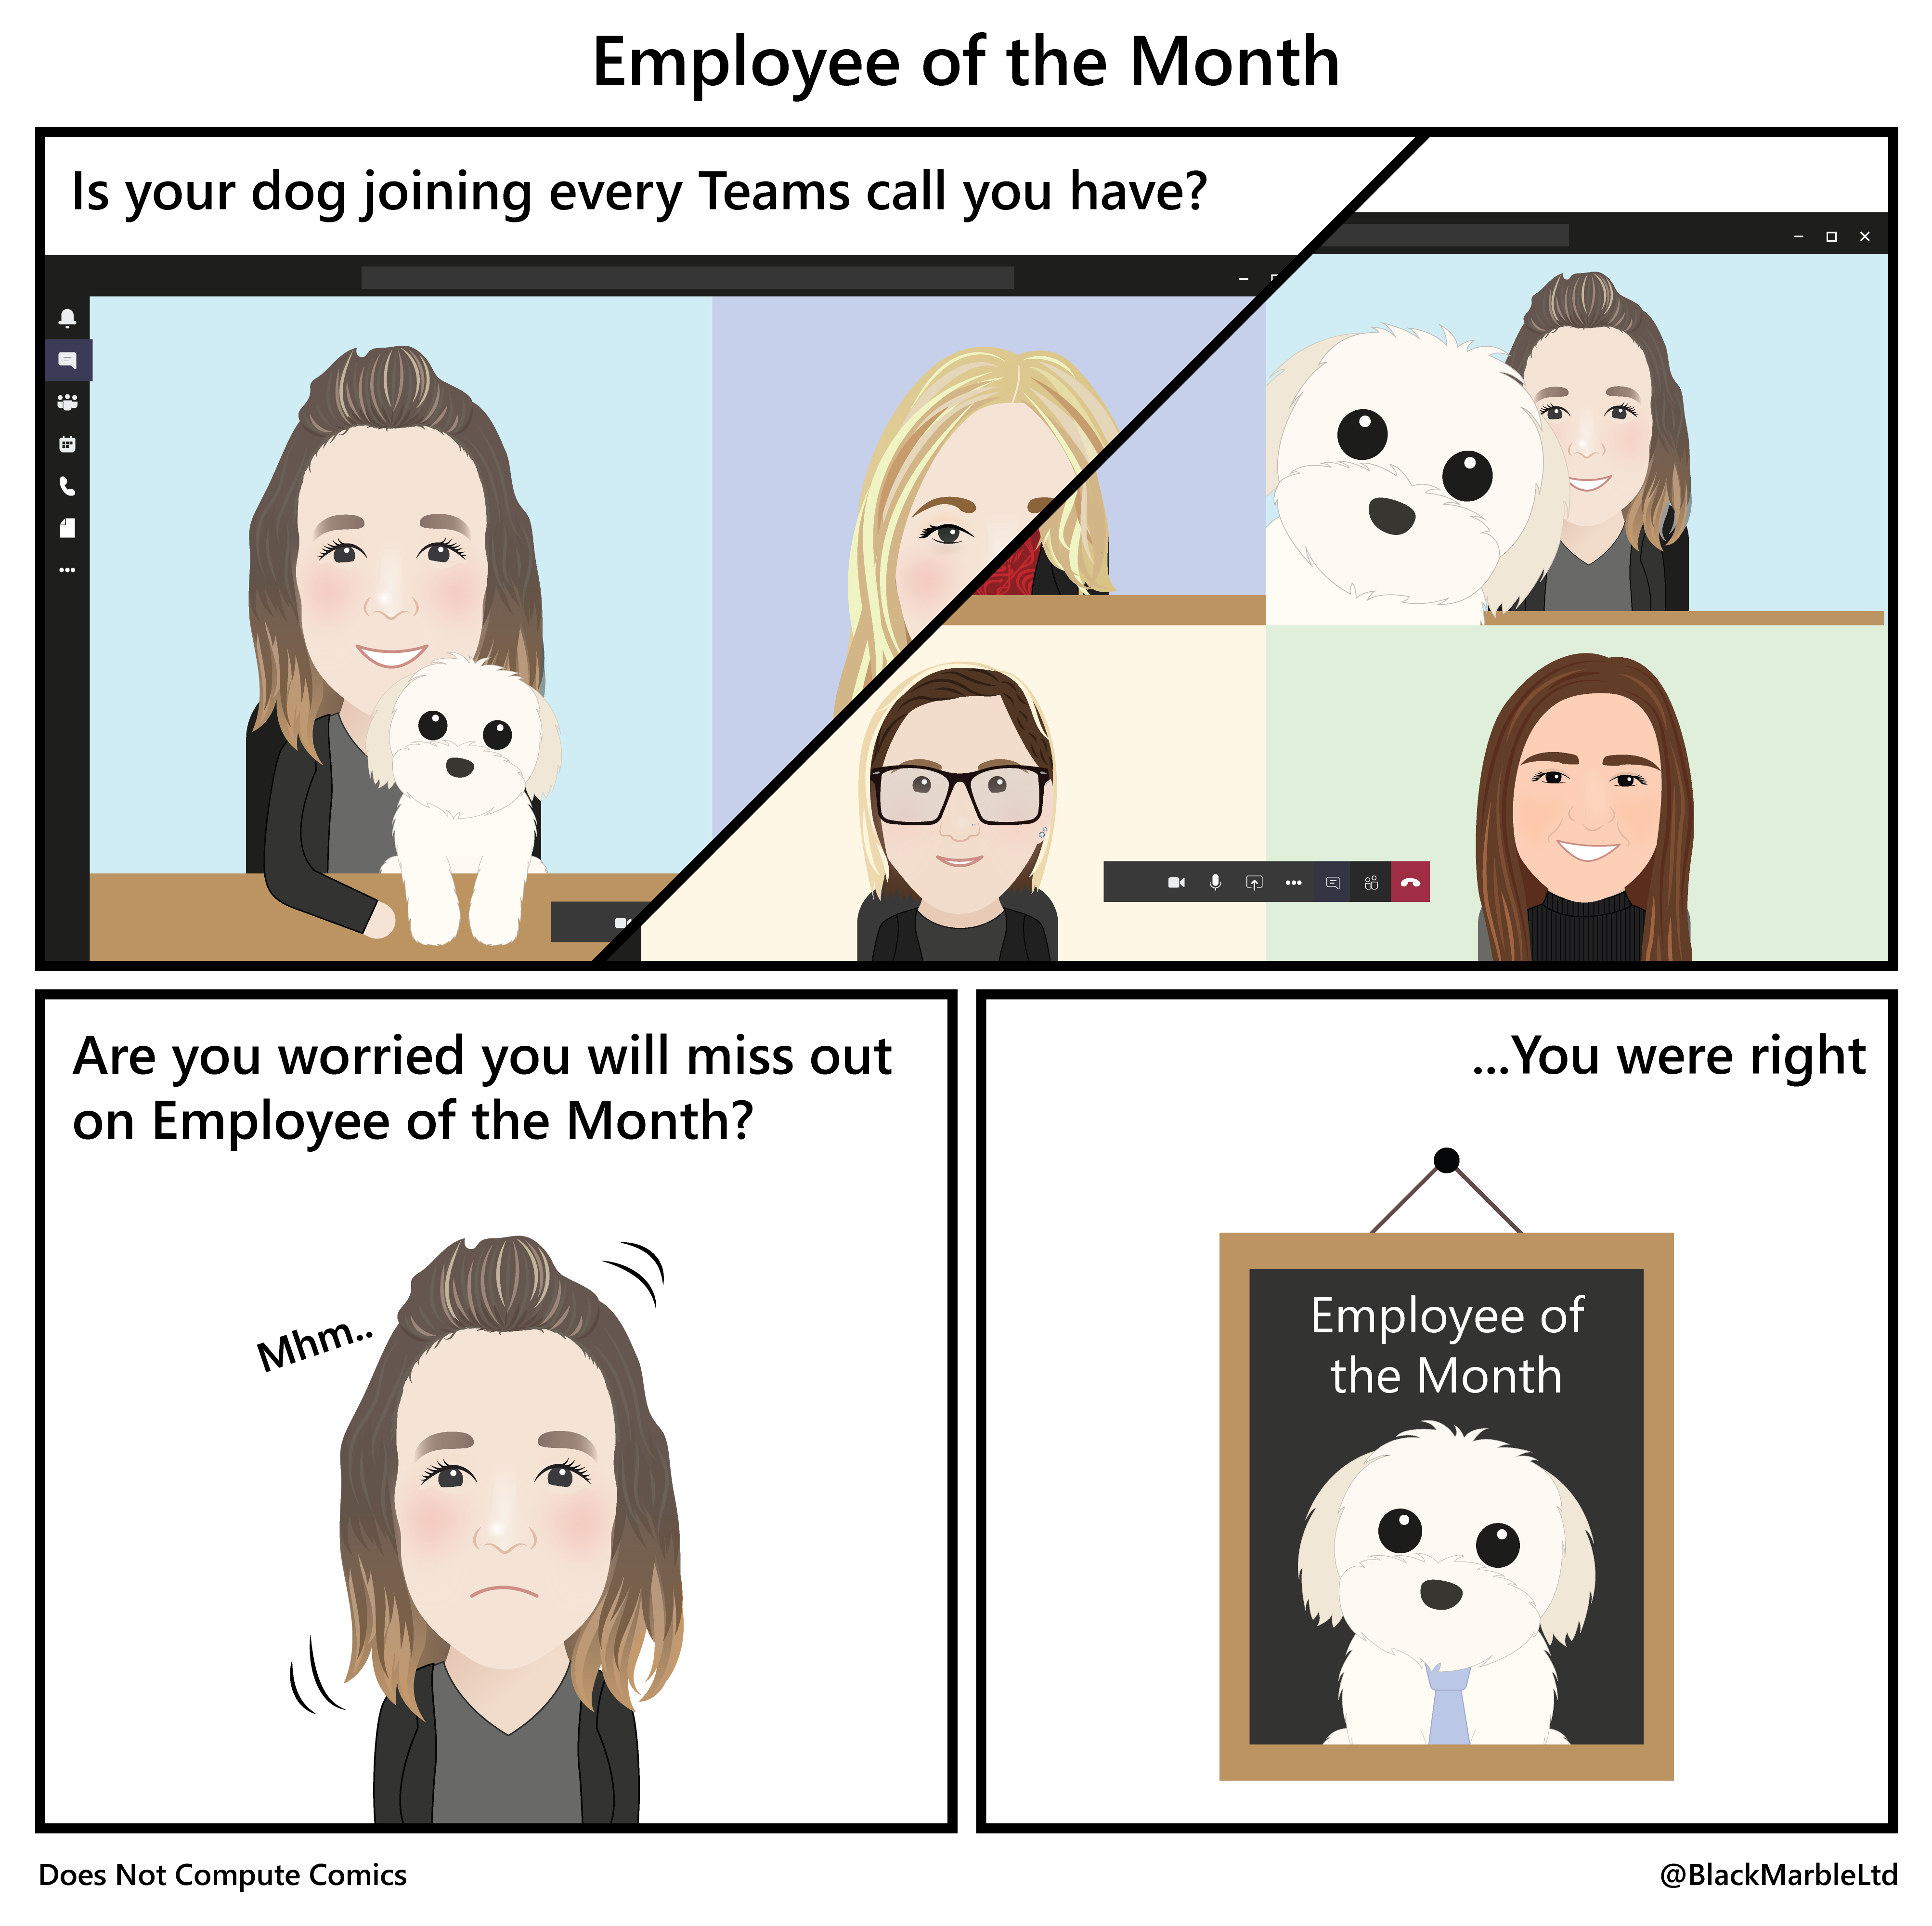 Employee of the Month featuring Catherine and Millie